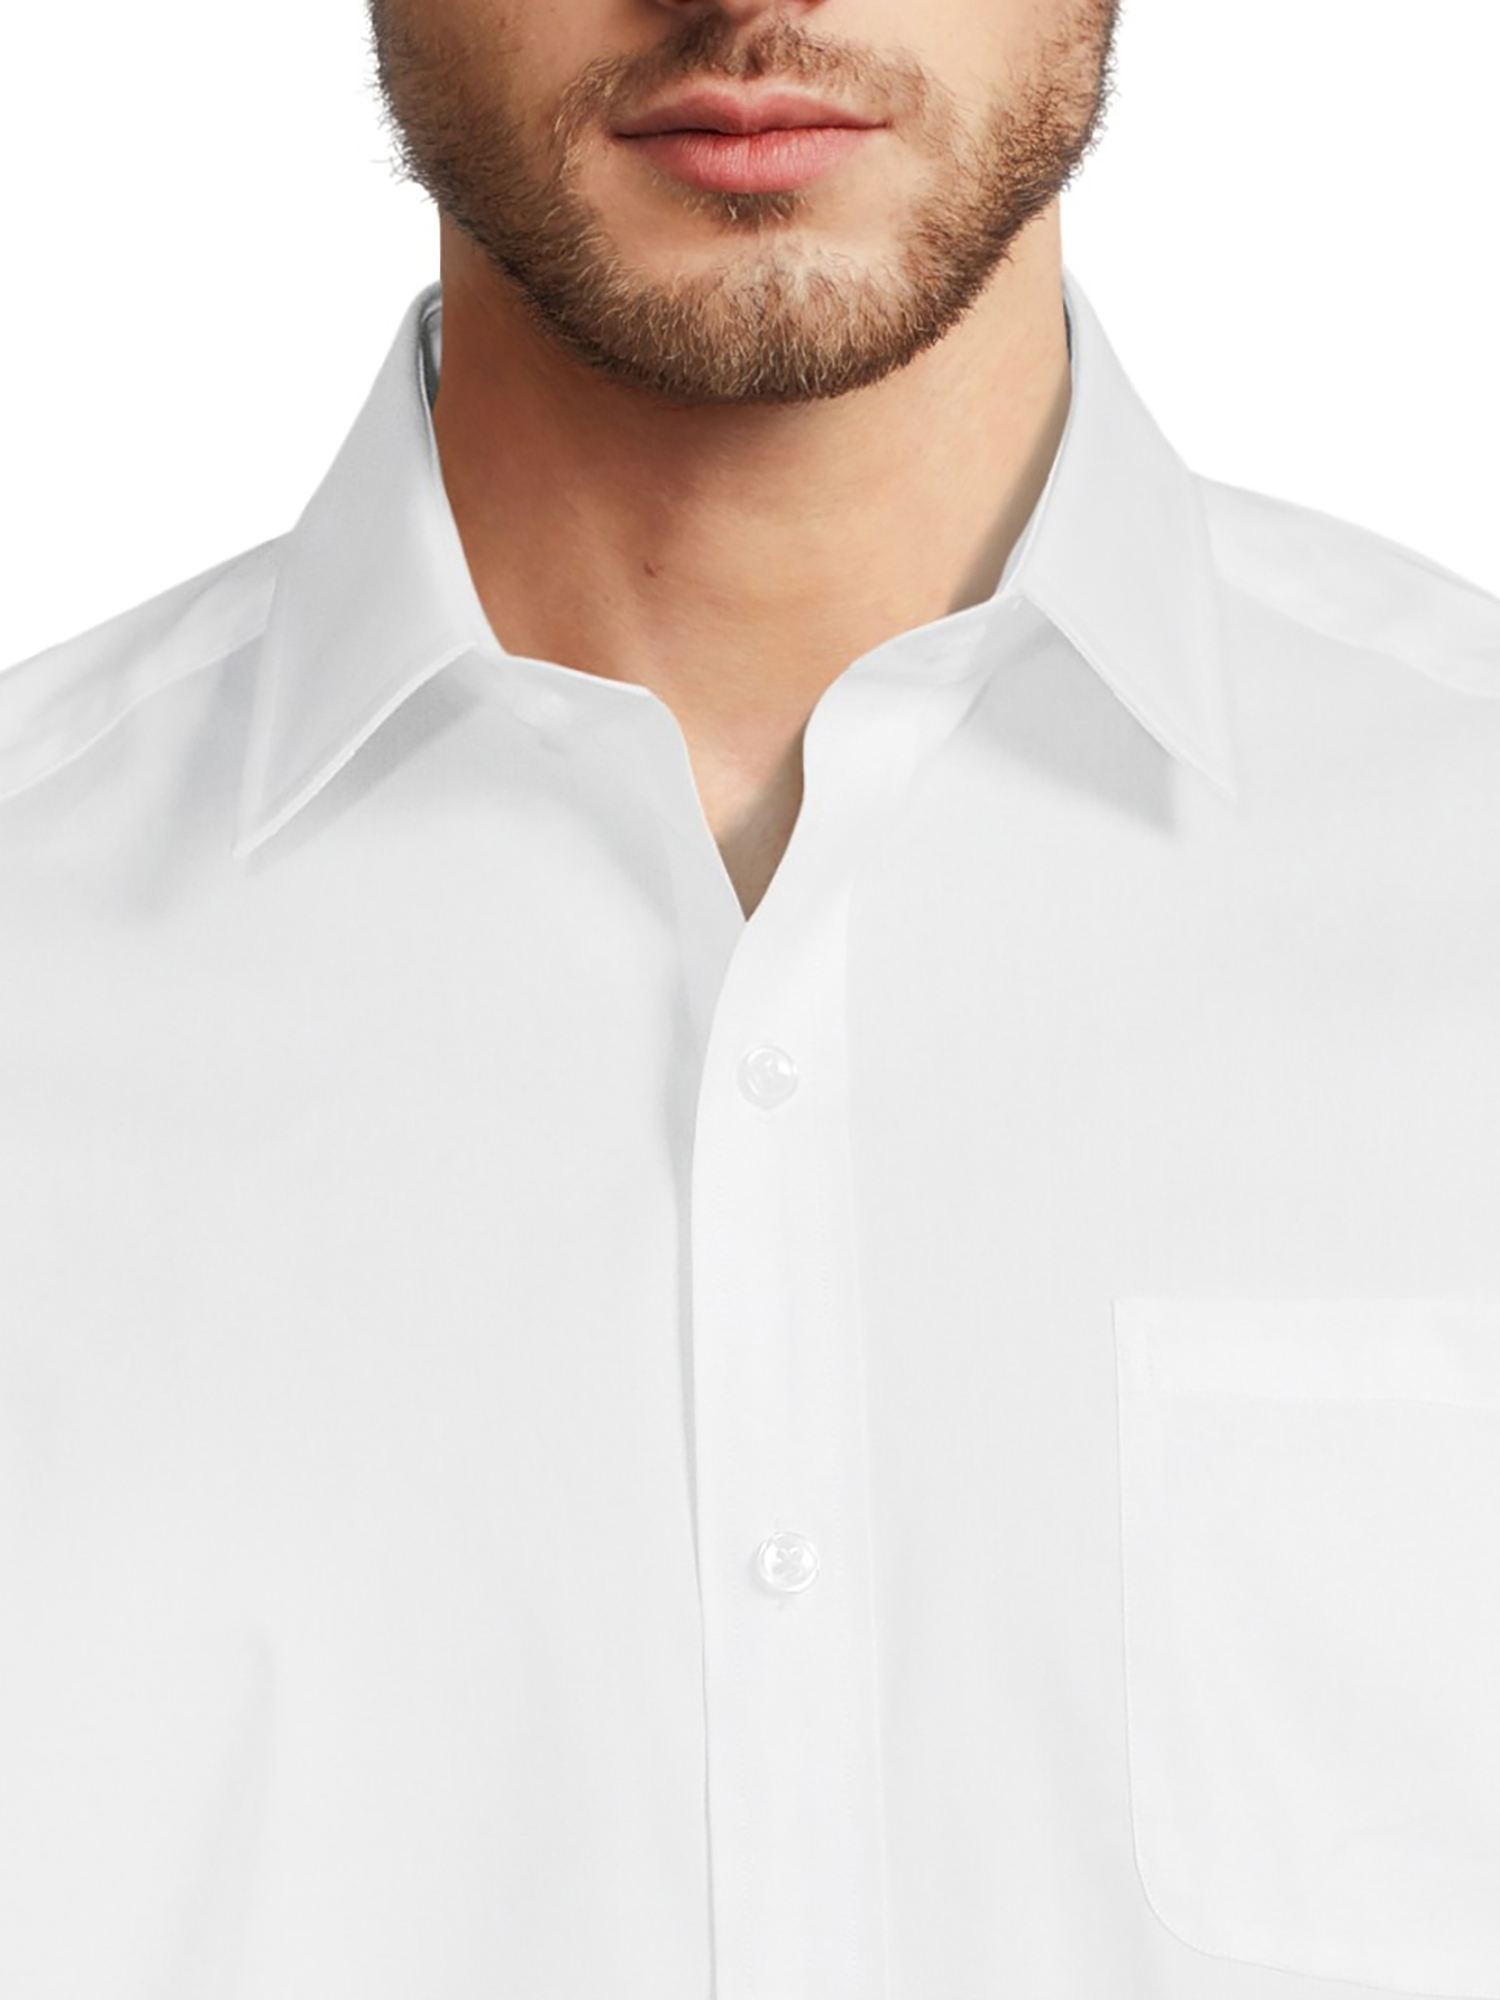 George Men's Classic Dress Shirt with Long Sleeves, Sizes S-3XL - image 4 of 5